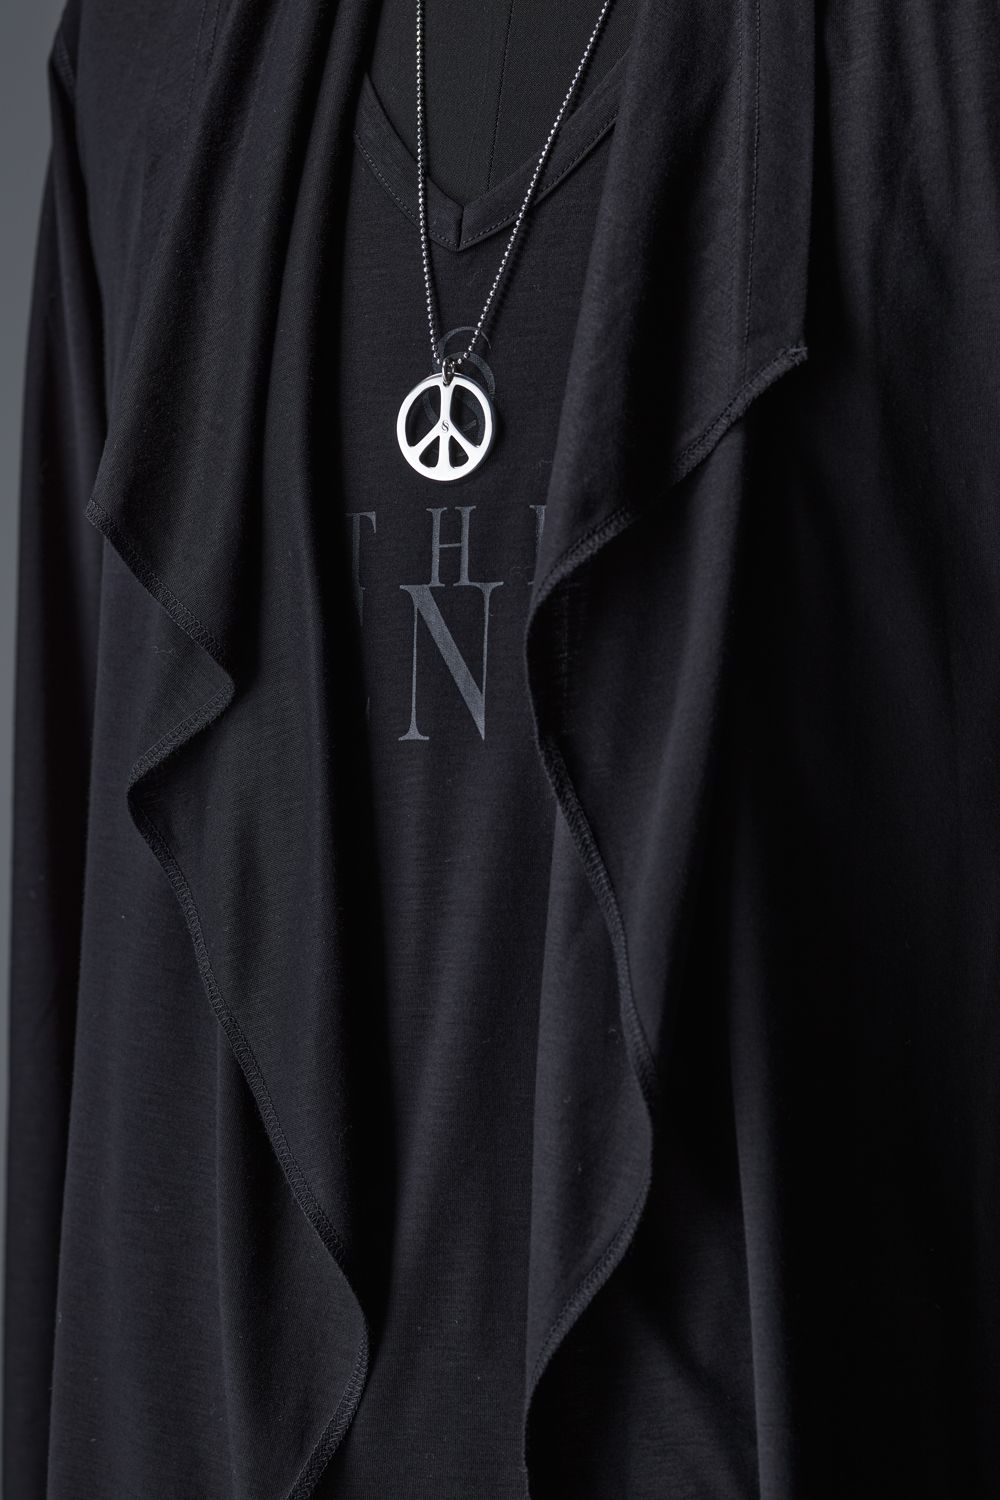 THE ONENESS - SGZ-PEACE Necklace / SUGIZO ピース ネックレス | laid 